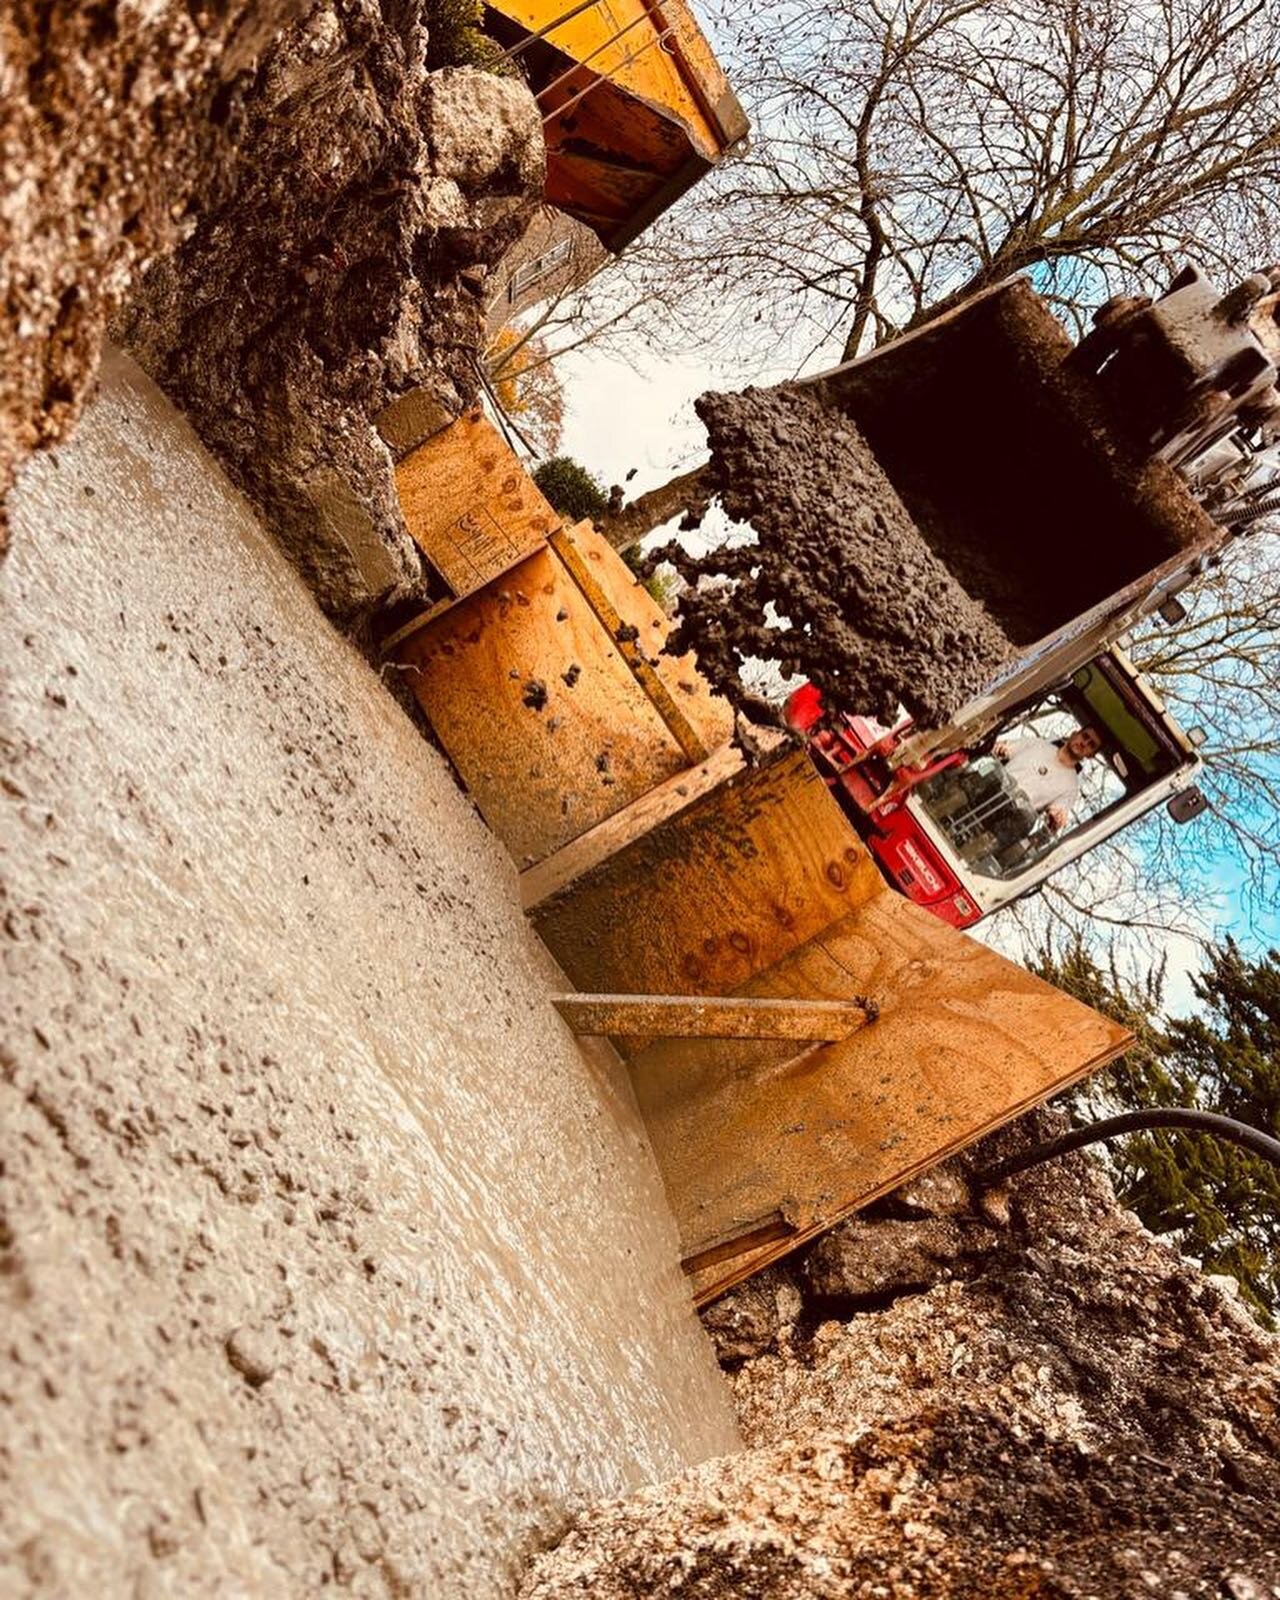 The Takeuchi helping us get in those tight spots on todays concrete pour 🧱

📸 @kendallfollit.7 

#takeuchi #groundwork #outdoorproject #concrete #machinery #construction #architecture #design #building  #engineering #contractor #home  #concrete  #b